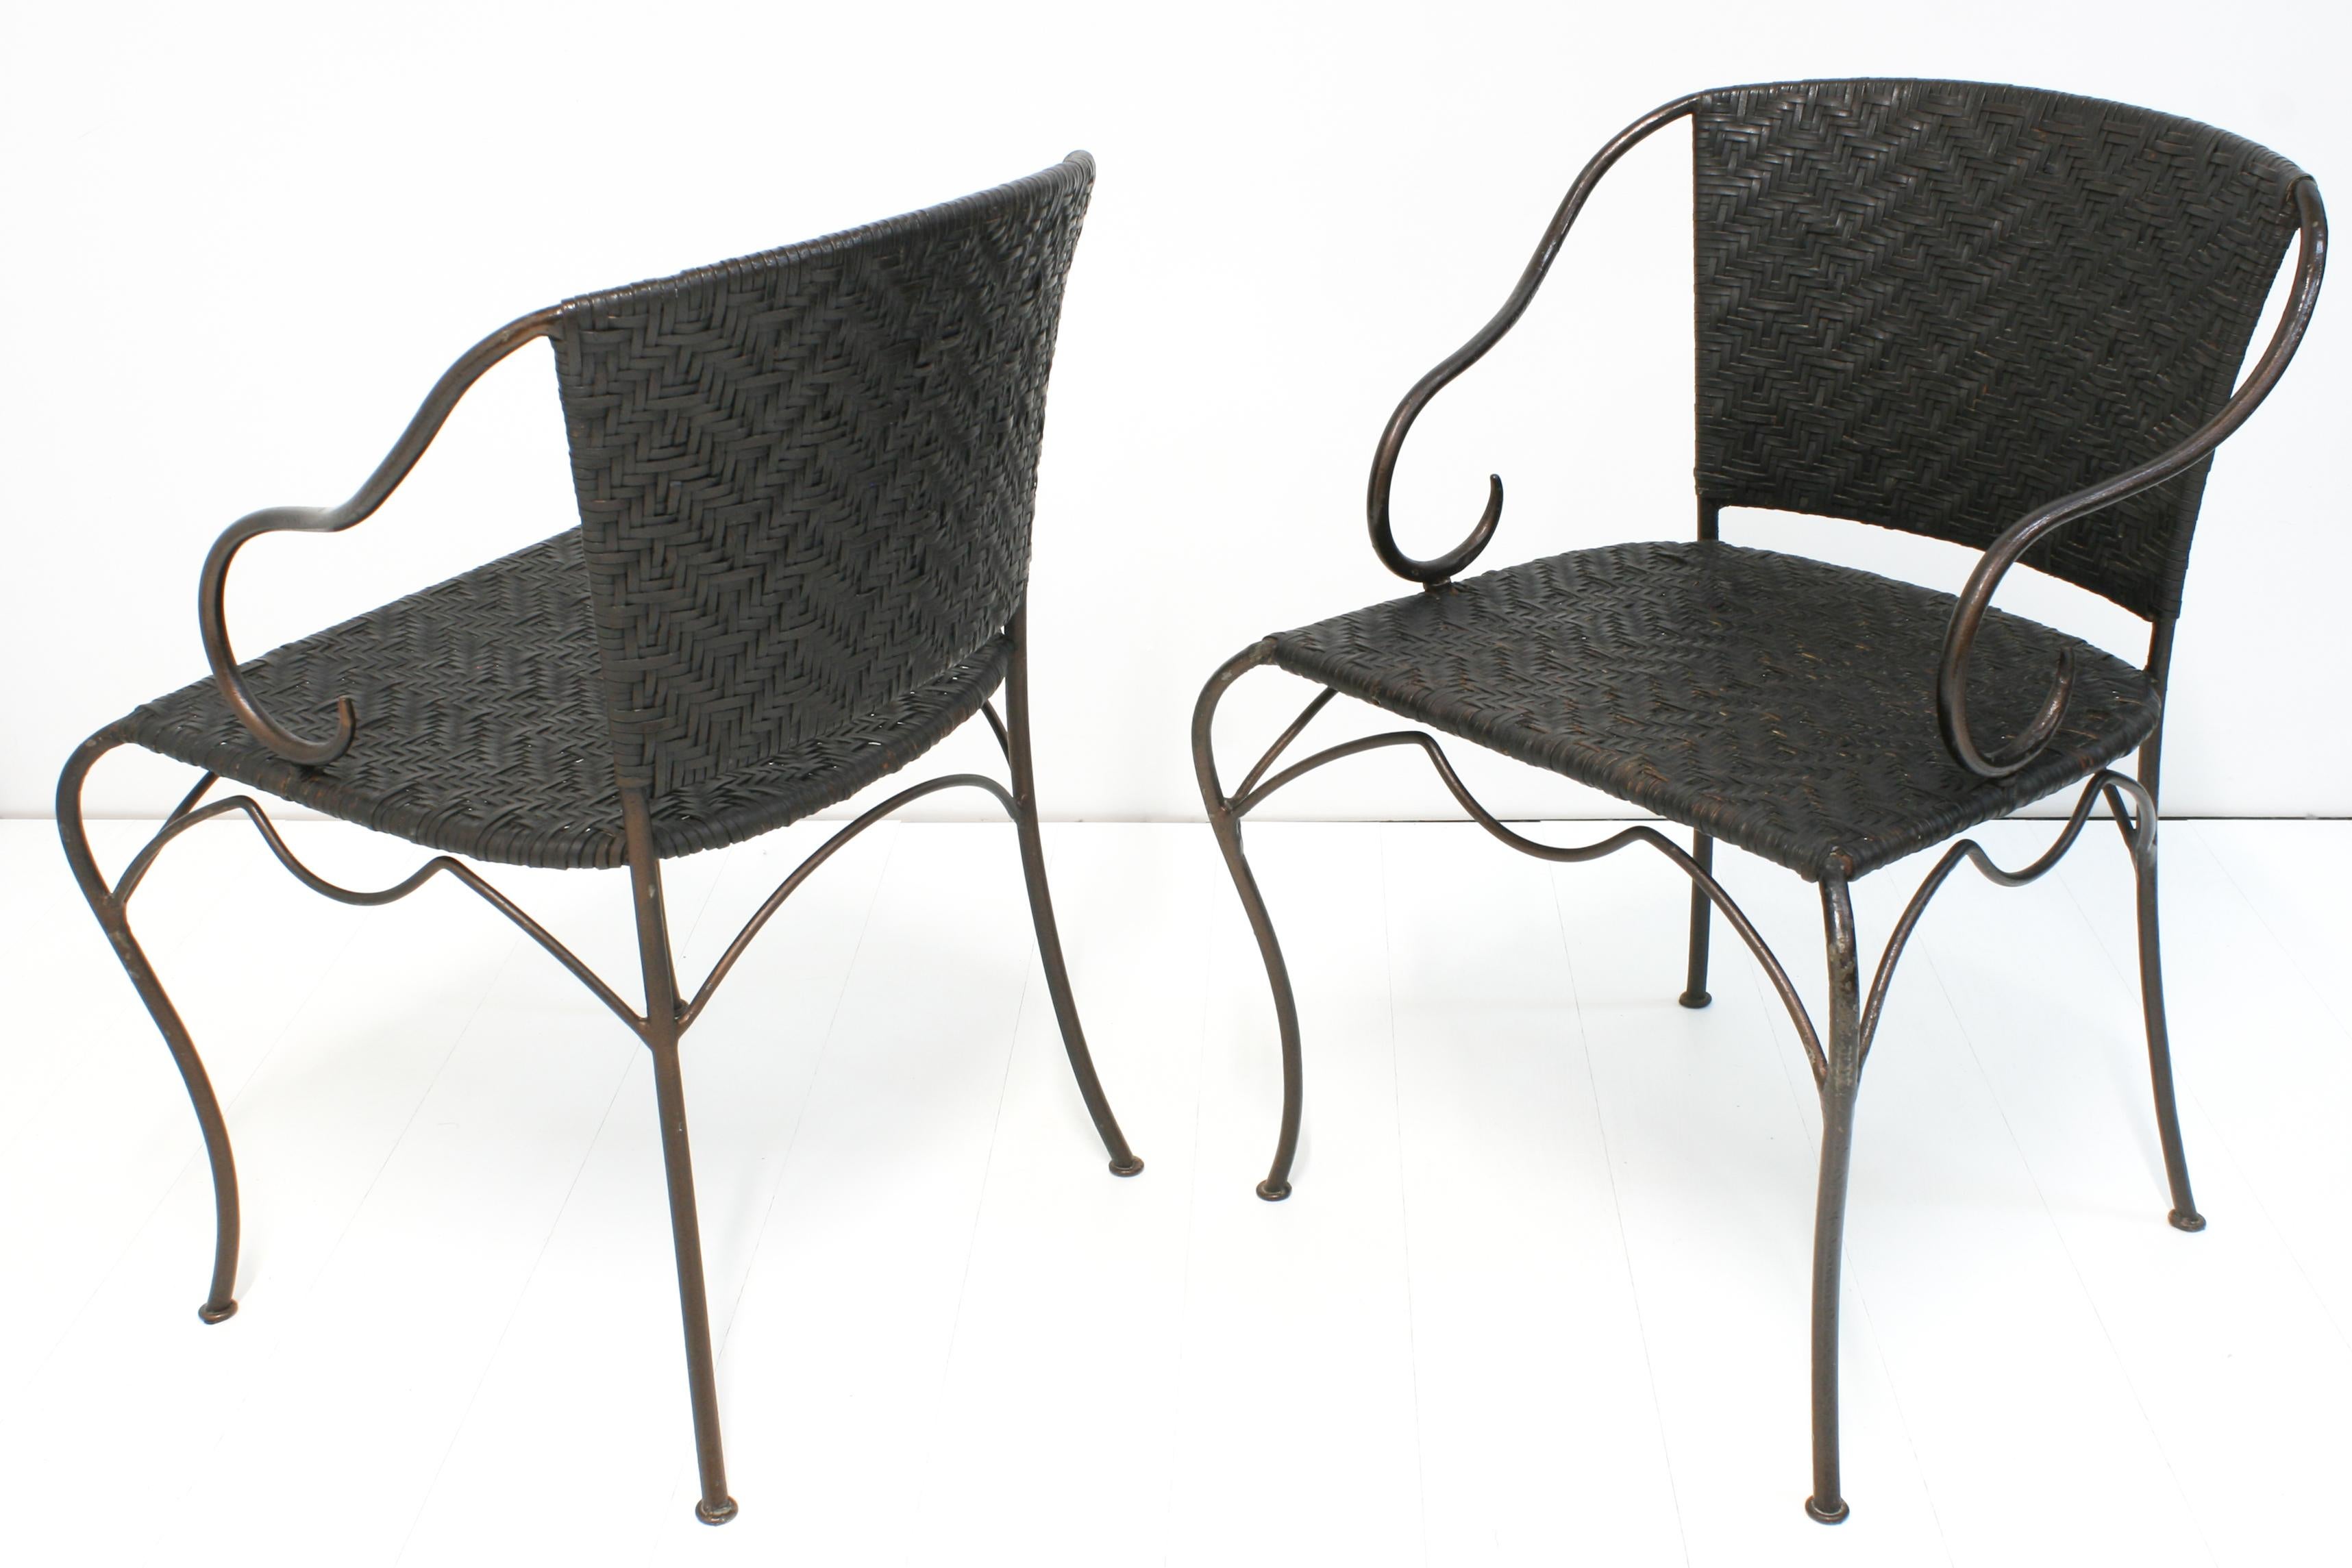 8x Wrought Iron & Leather Anatol Dining Armchairs by Gunther Lambert, 1990s For Sale 1